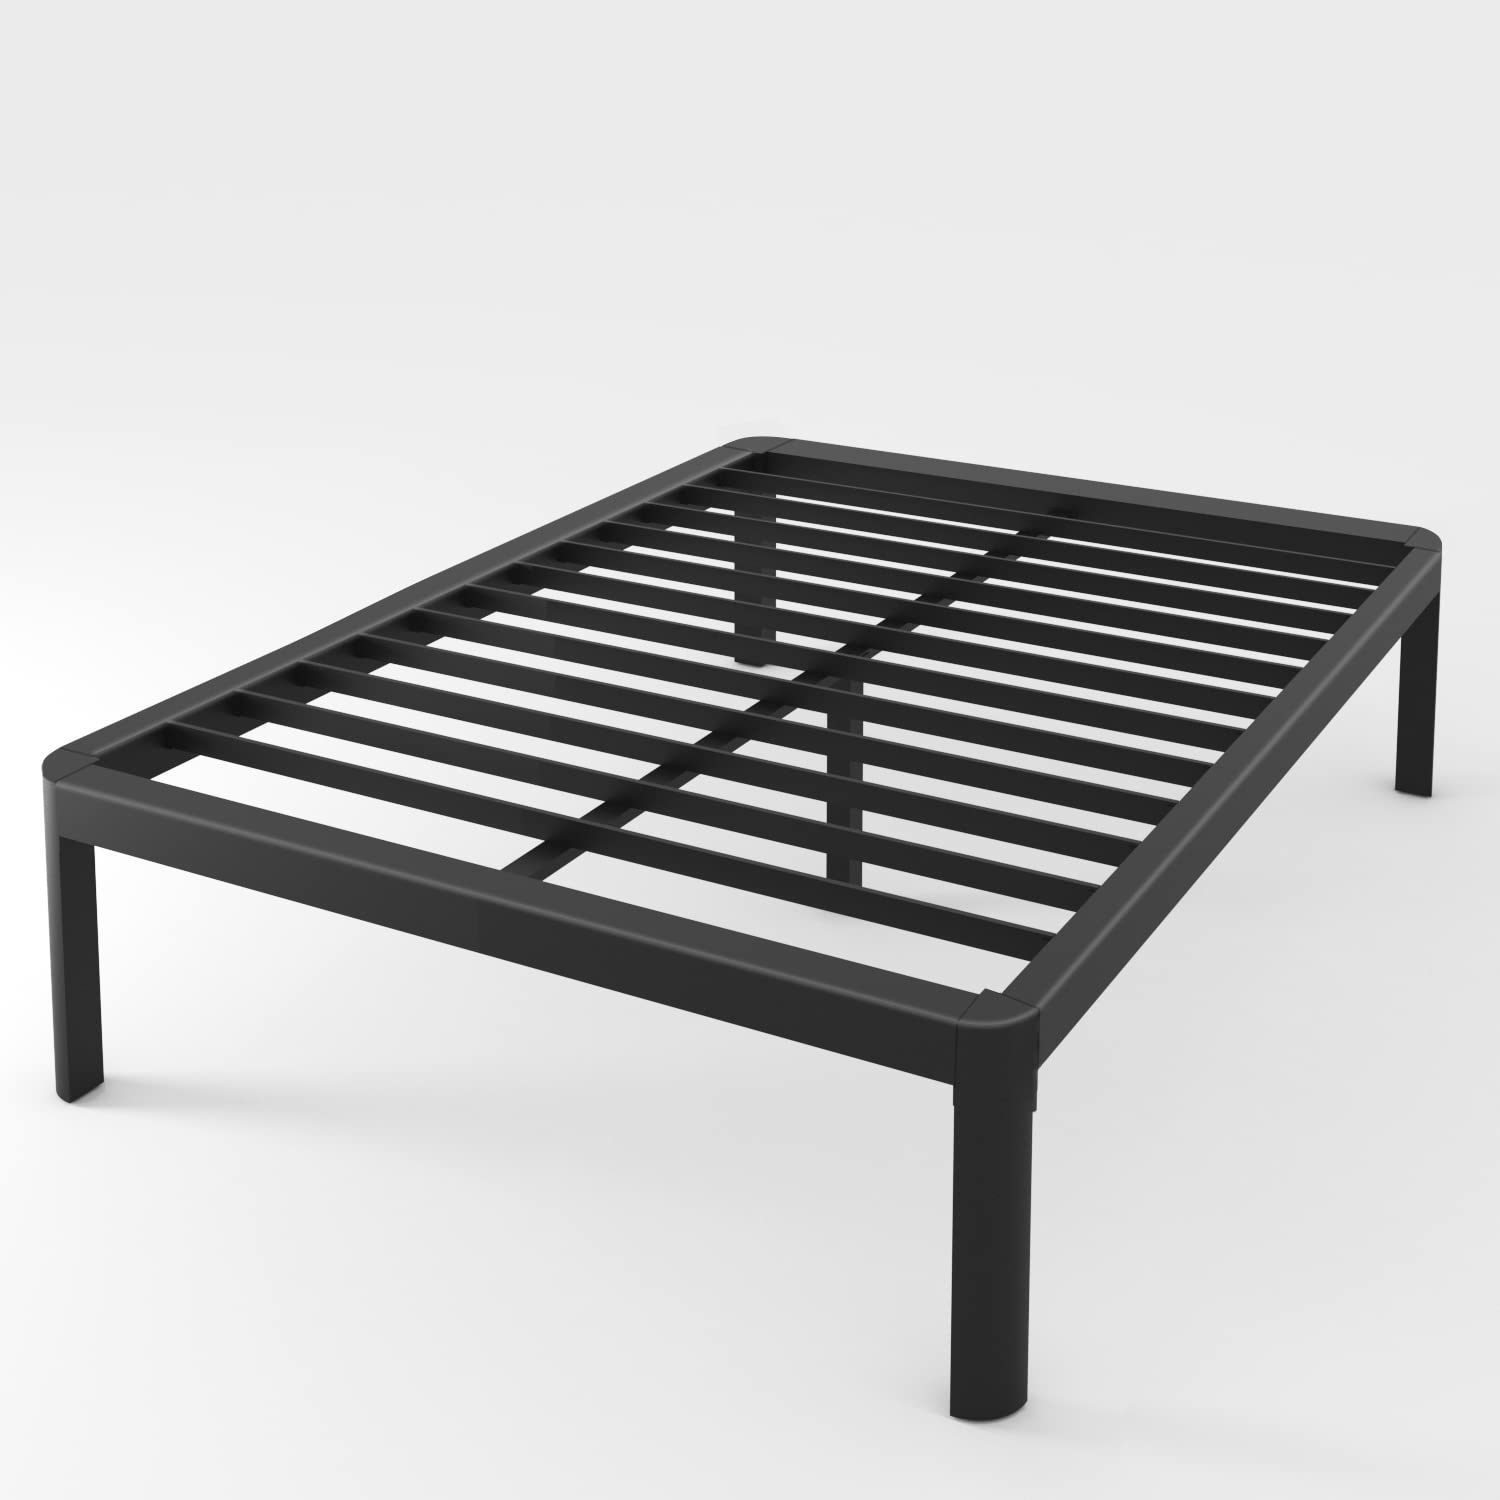 Yitong Angel 18 Inch Queen Bed Frame with Round Corner Edge Legs, 3500 lbs Heavy Duty Metal Platform Bed Frame Queen Size, Steel